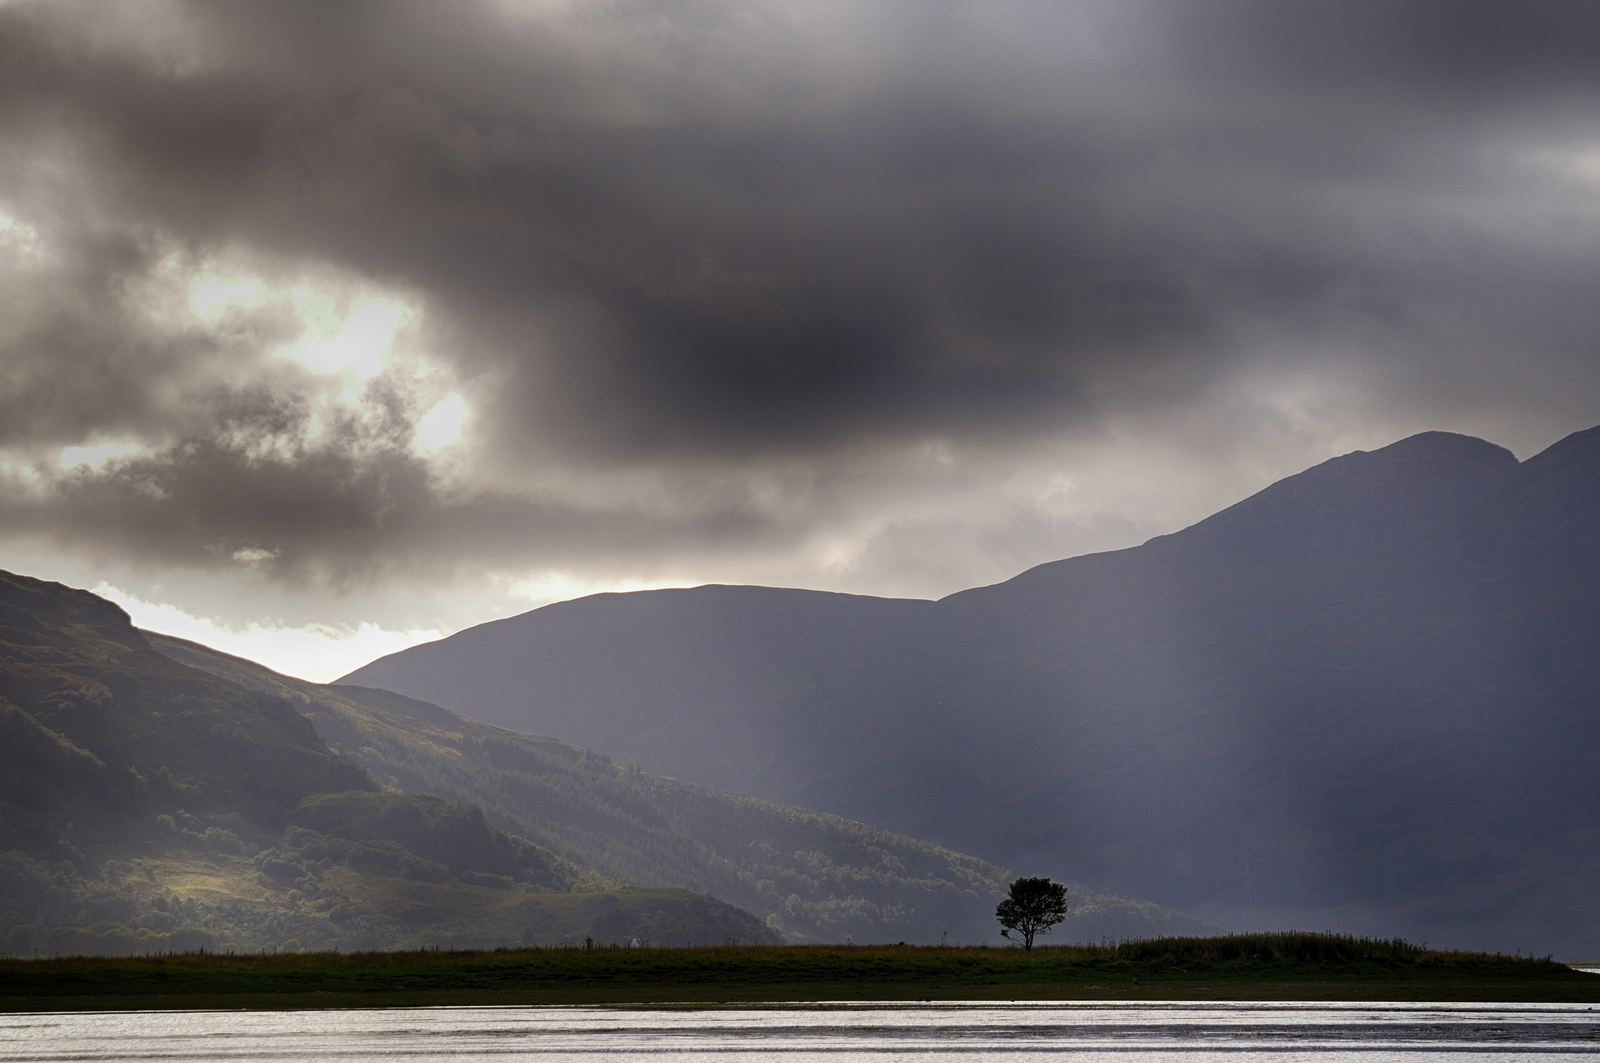 The Lonely Tree: Highlands of Scotland - just one of many images available to license for commercial and editorial use. Image by photographer Richard Flint 